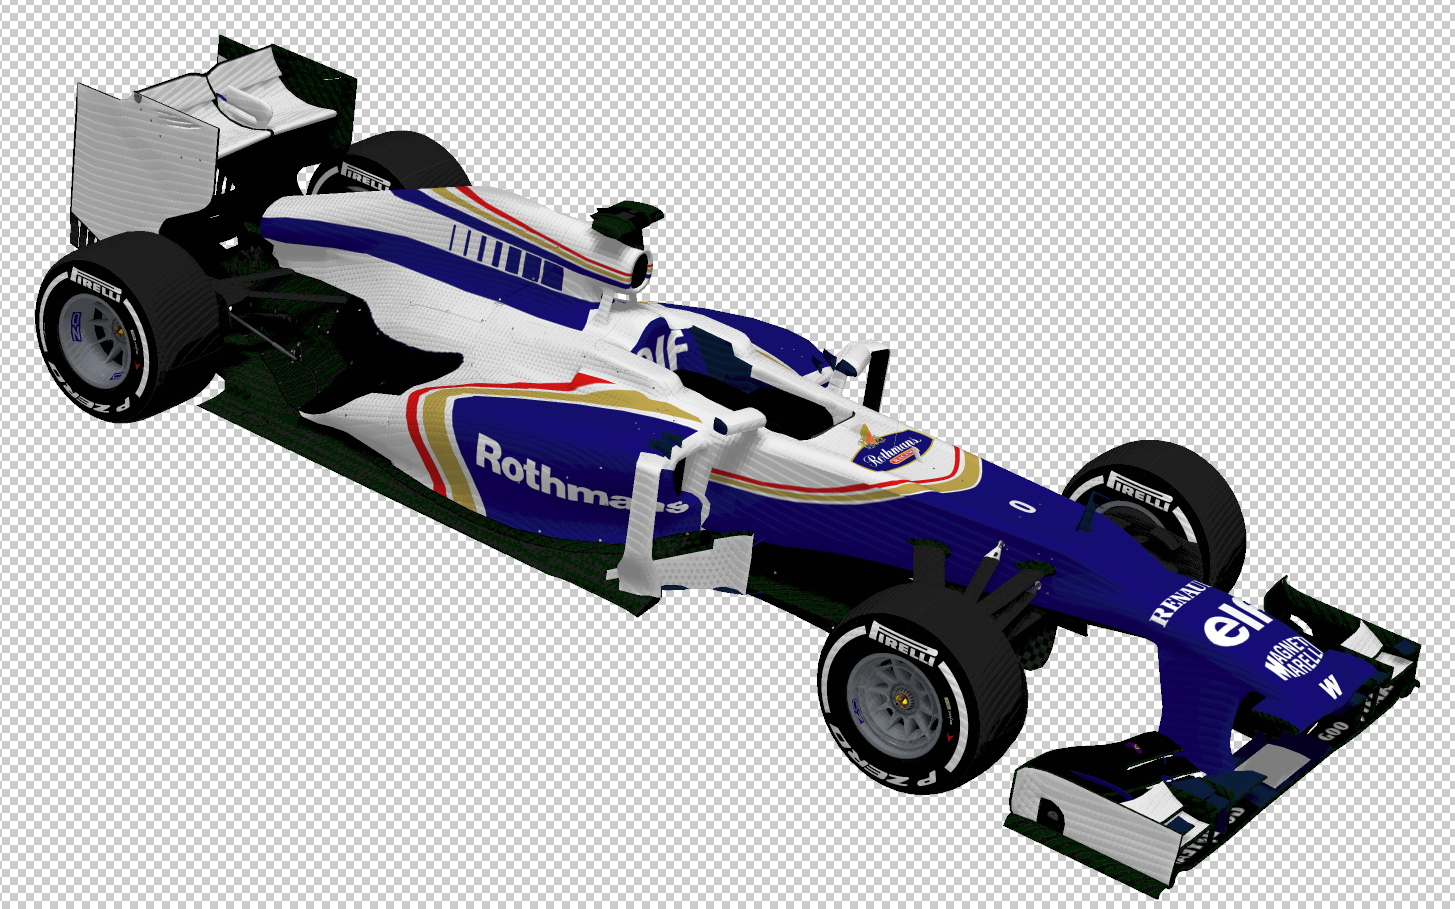 1994 Williams.PNG